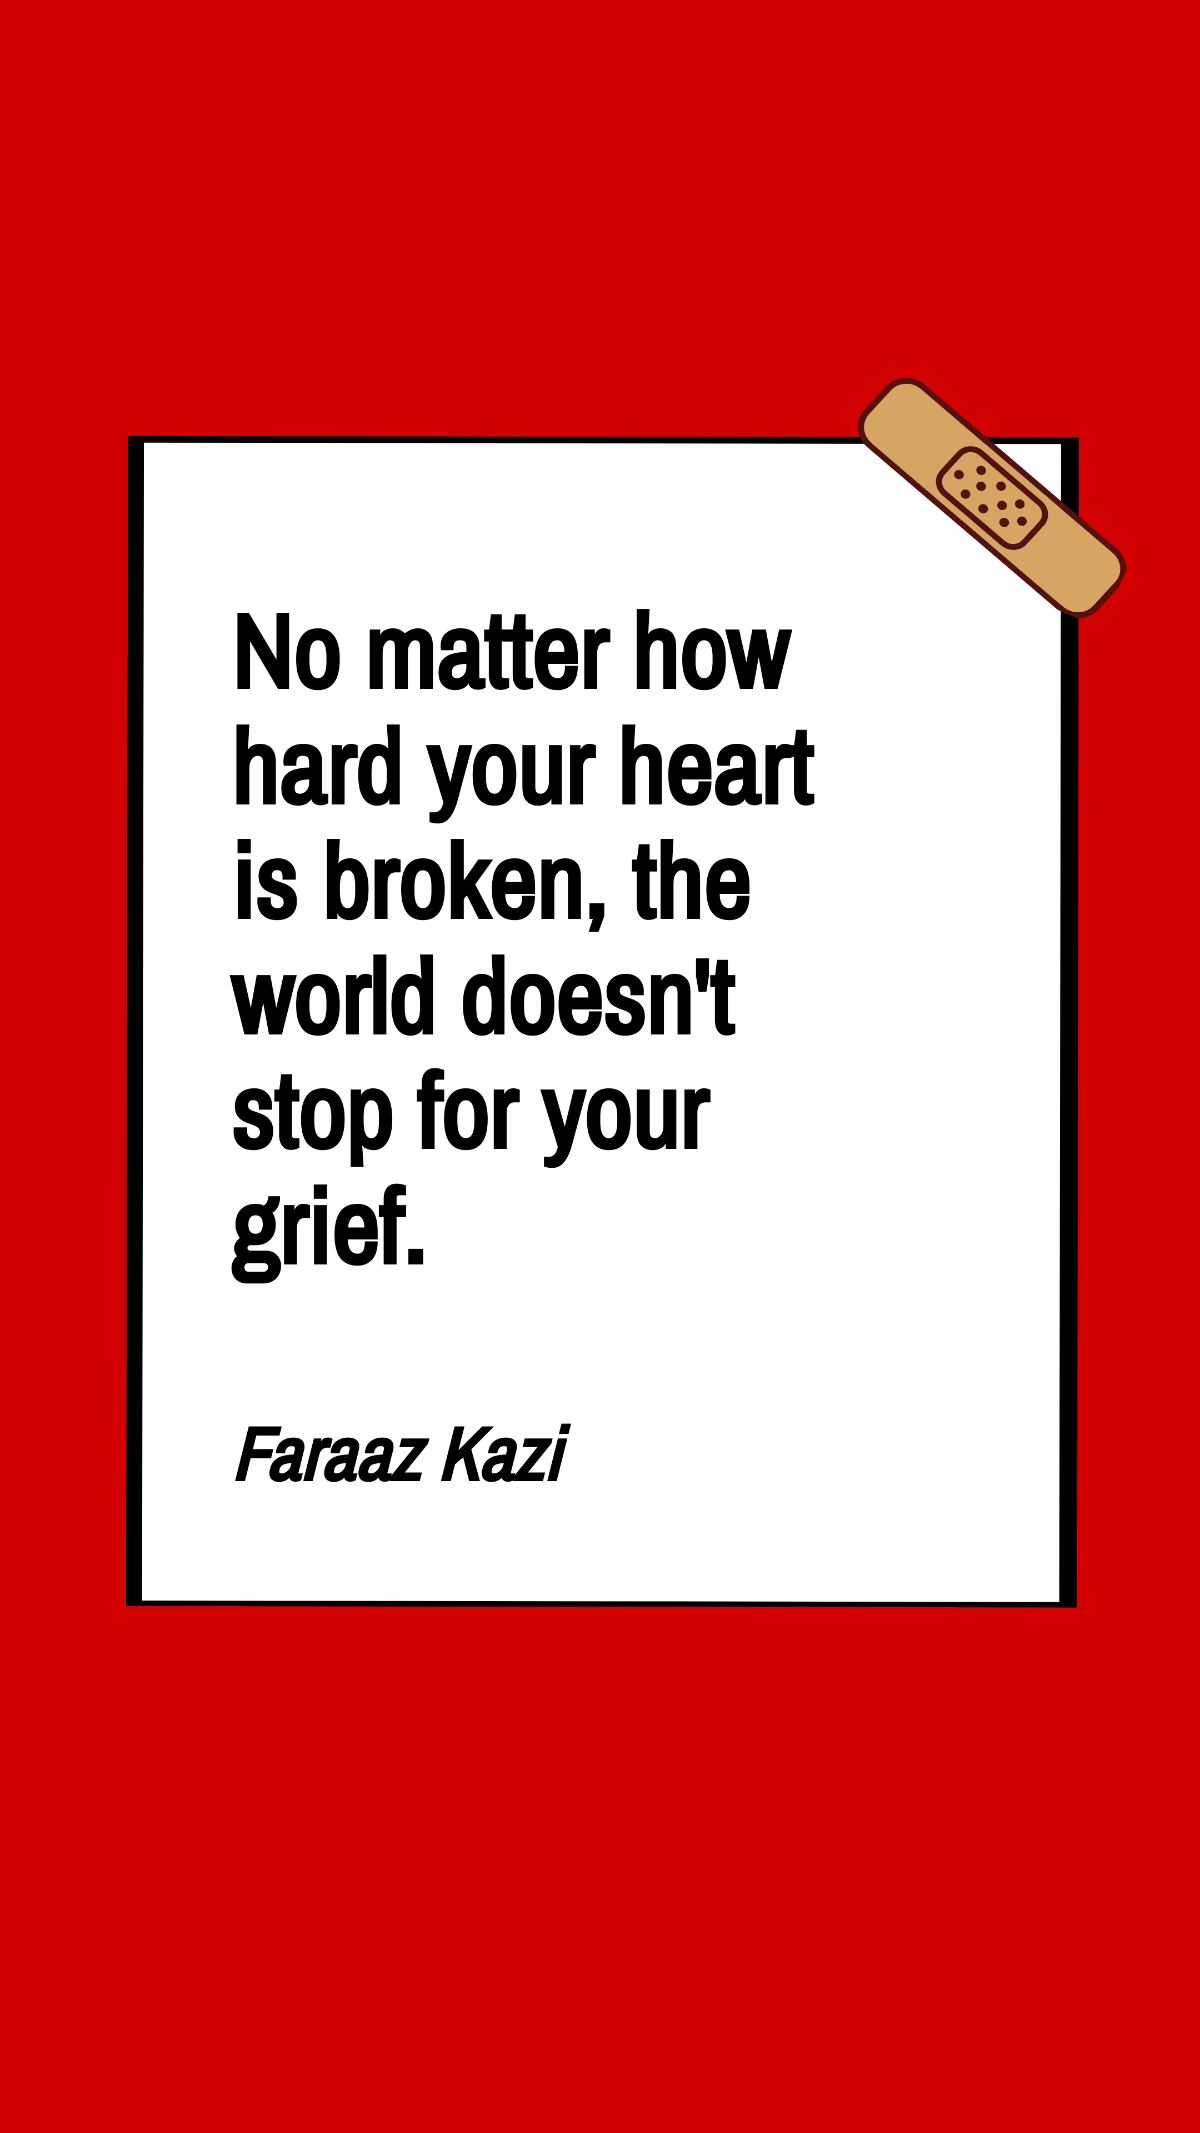 Faraaz Kazi - No matter how hard your heart is broken, the world doesn't stop for your grief.